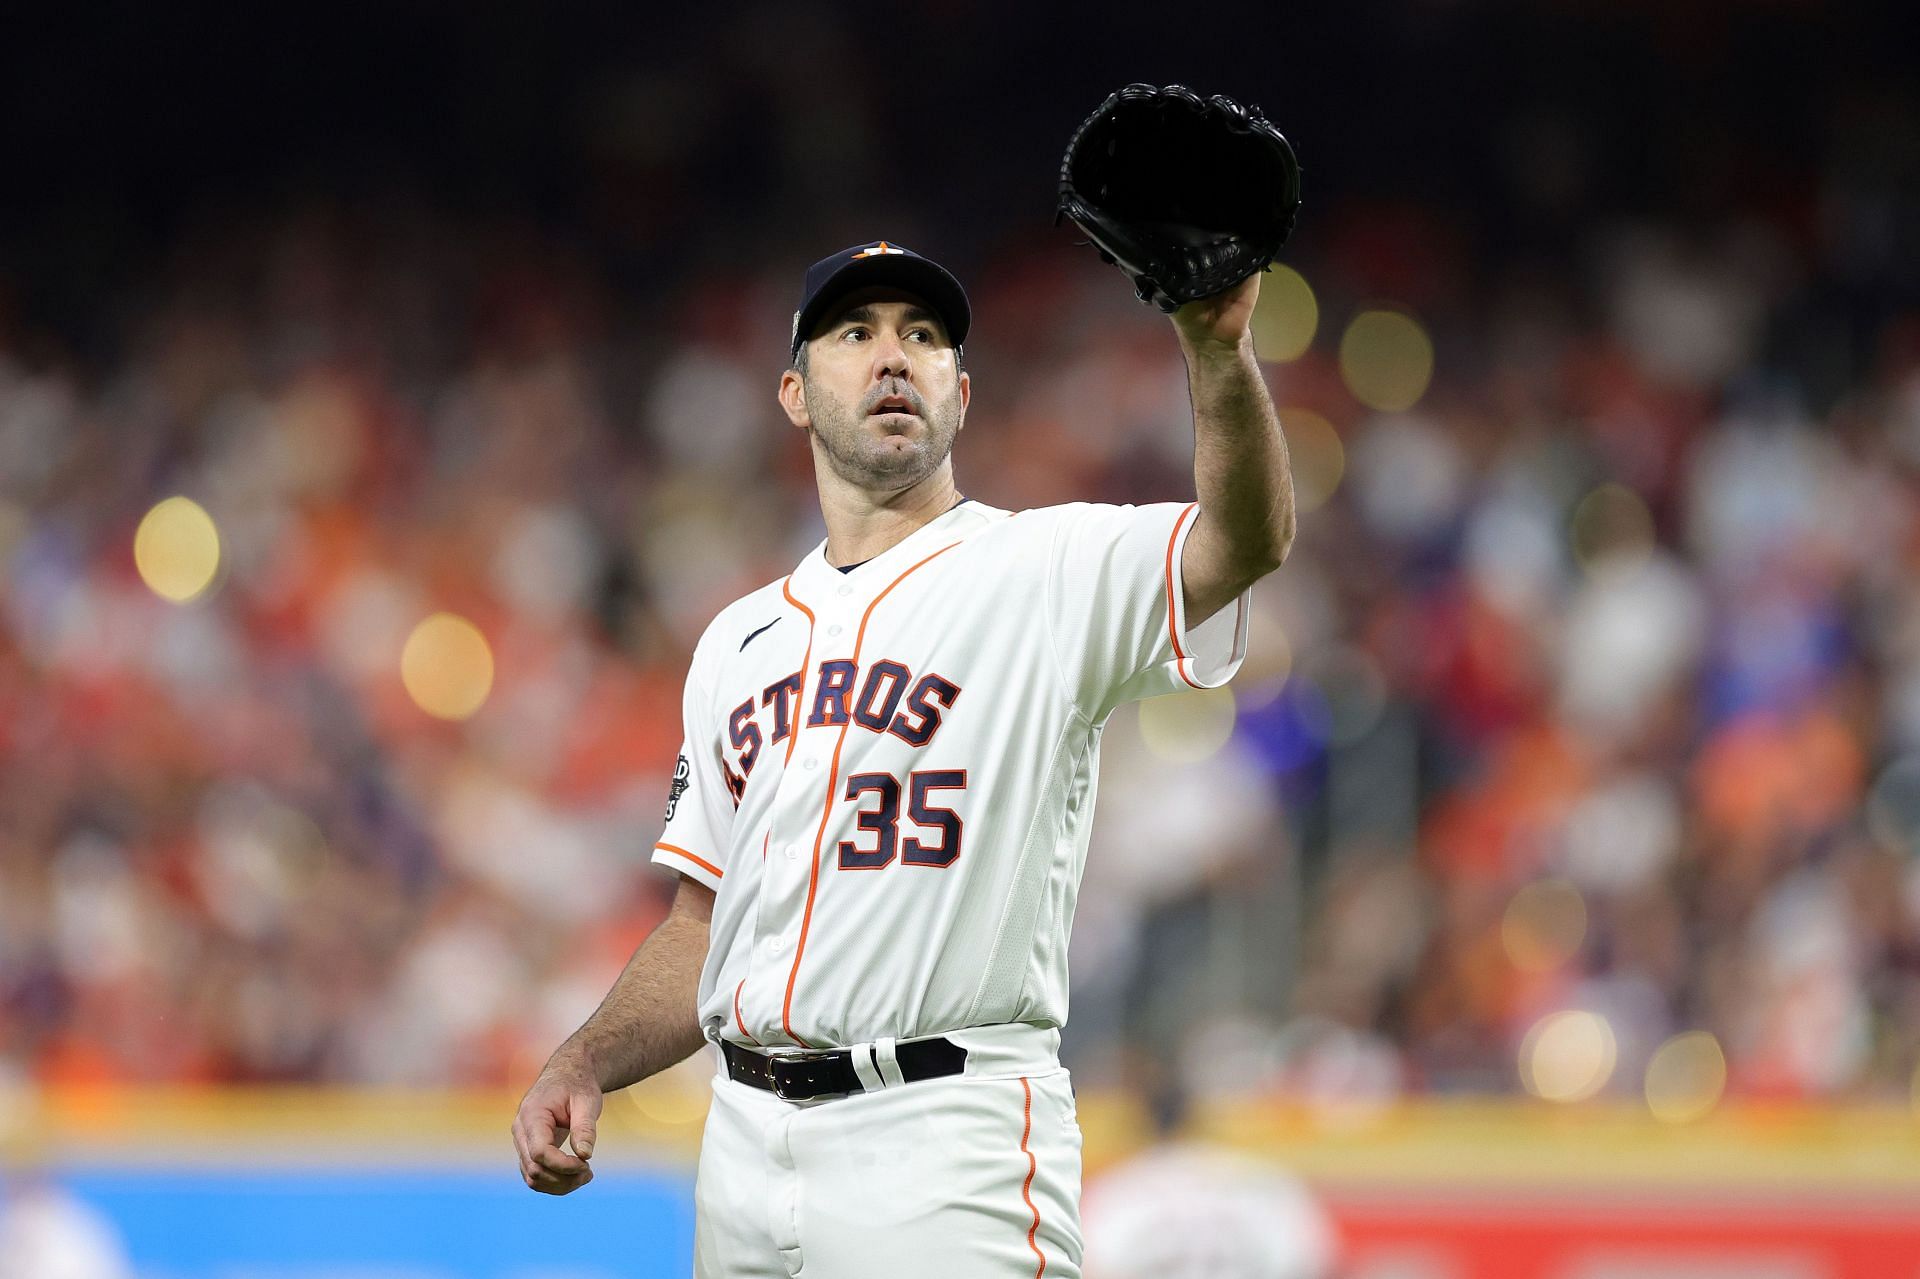 The Yankees can gamble again with pursuing Justin Verlander